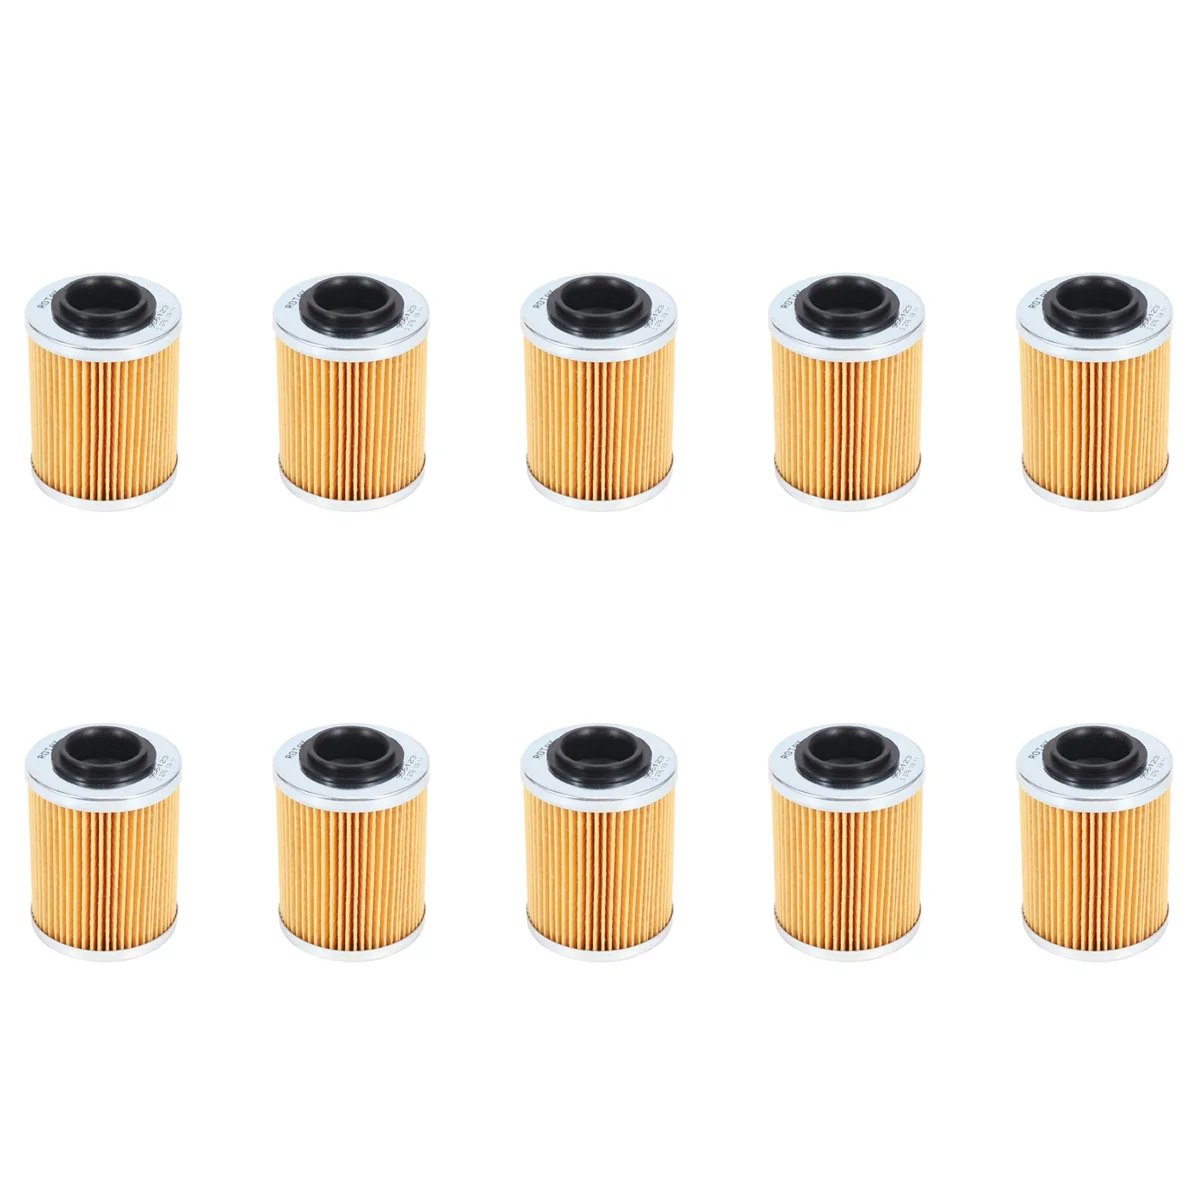 

10X Oil Filter for Seadoo 900 2014-2015 420956123 006-559